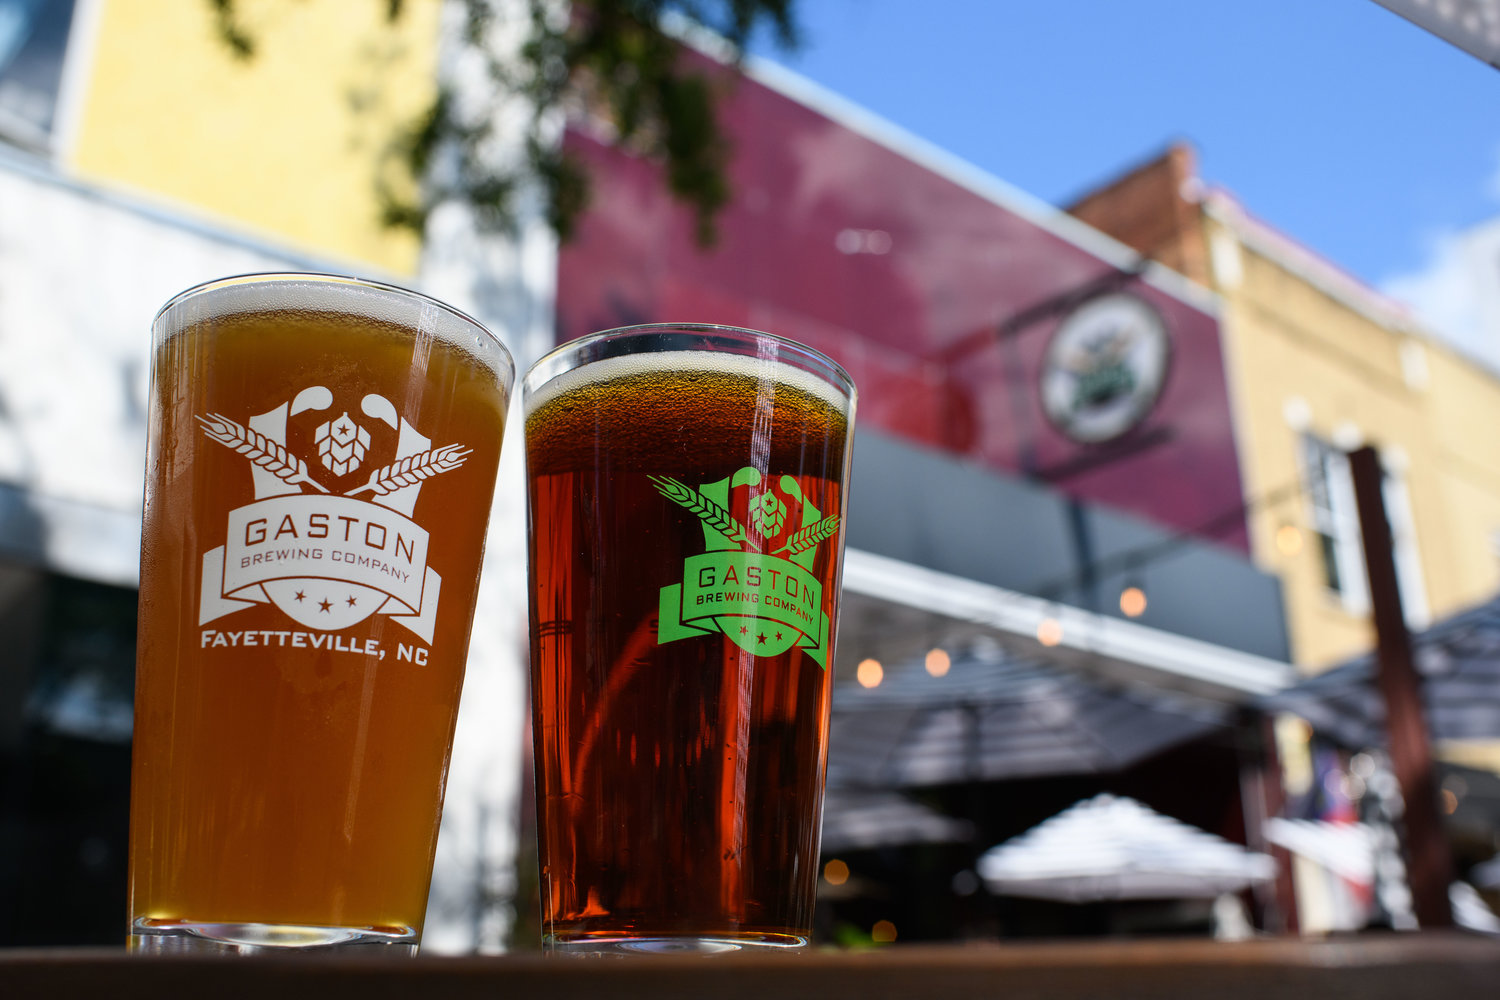 Gaston Brewing Co. has four new fall brews to celebrate at its restaurant location on Hay Street. Pictured is Pumpkin Ale and Oktoberfest.